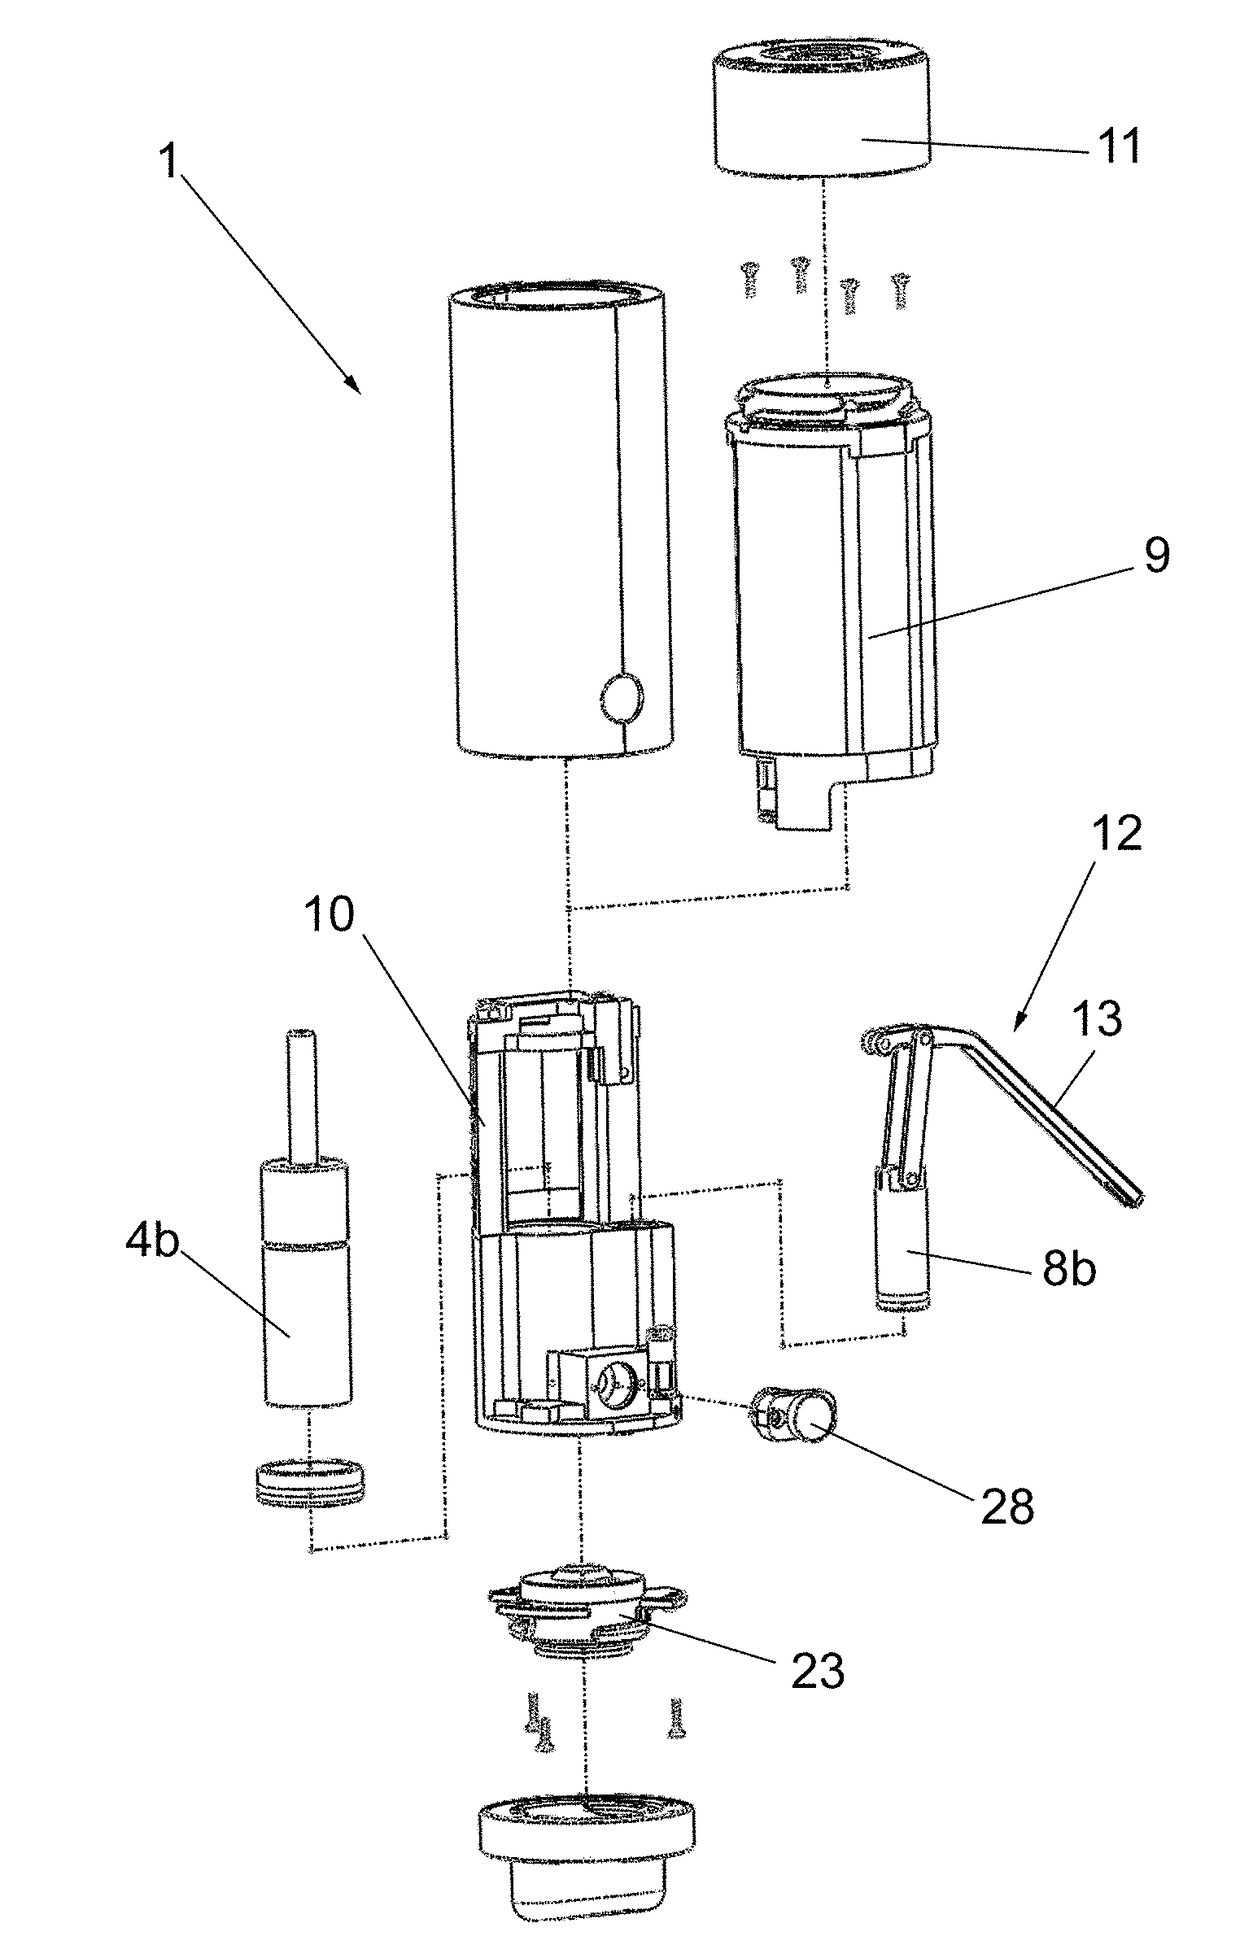 Machine for preparing a drink and method for preparing a drink using such a machine